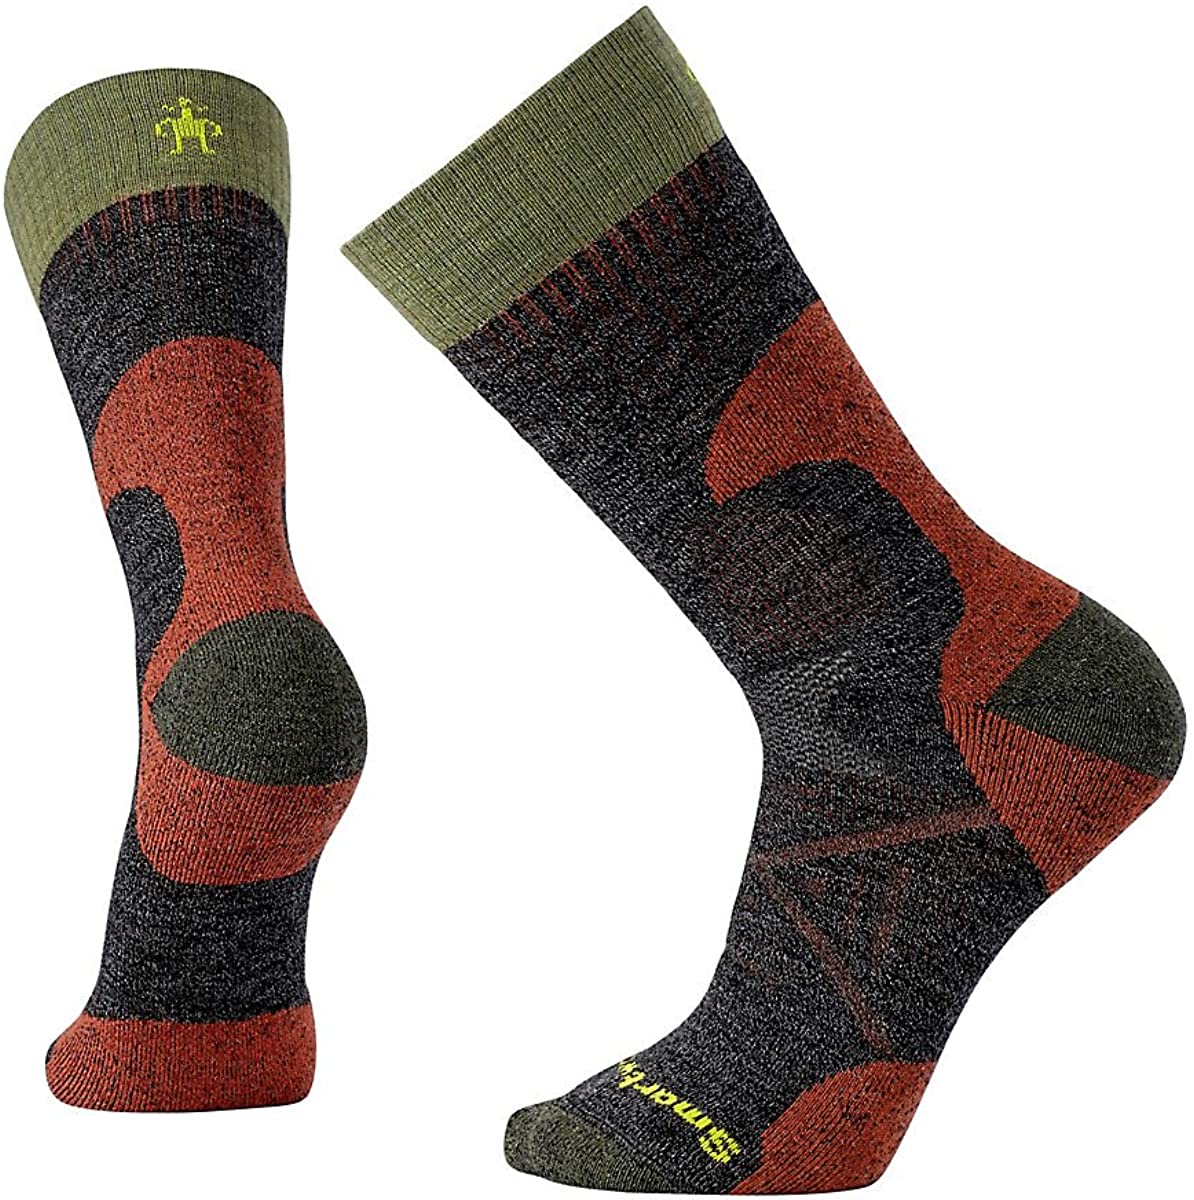 Unisex Smartwool PhD Hunting Medium Crew Socks in Black from the front view